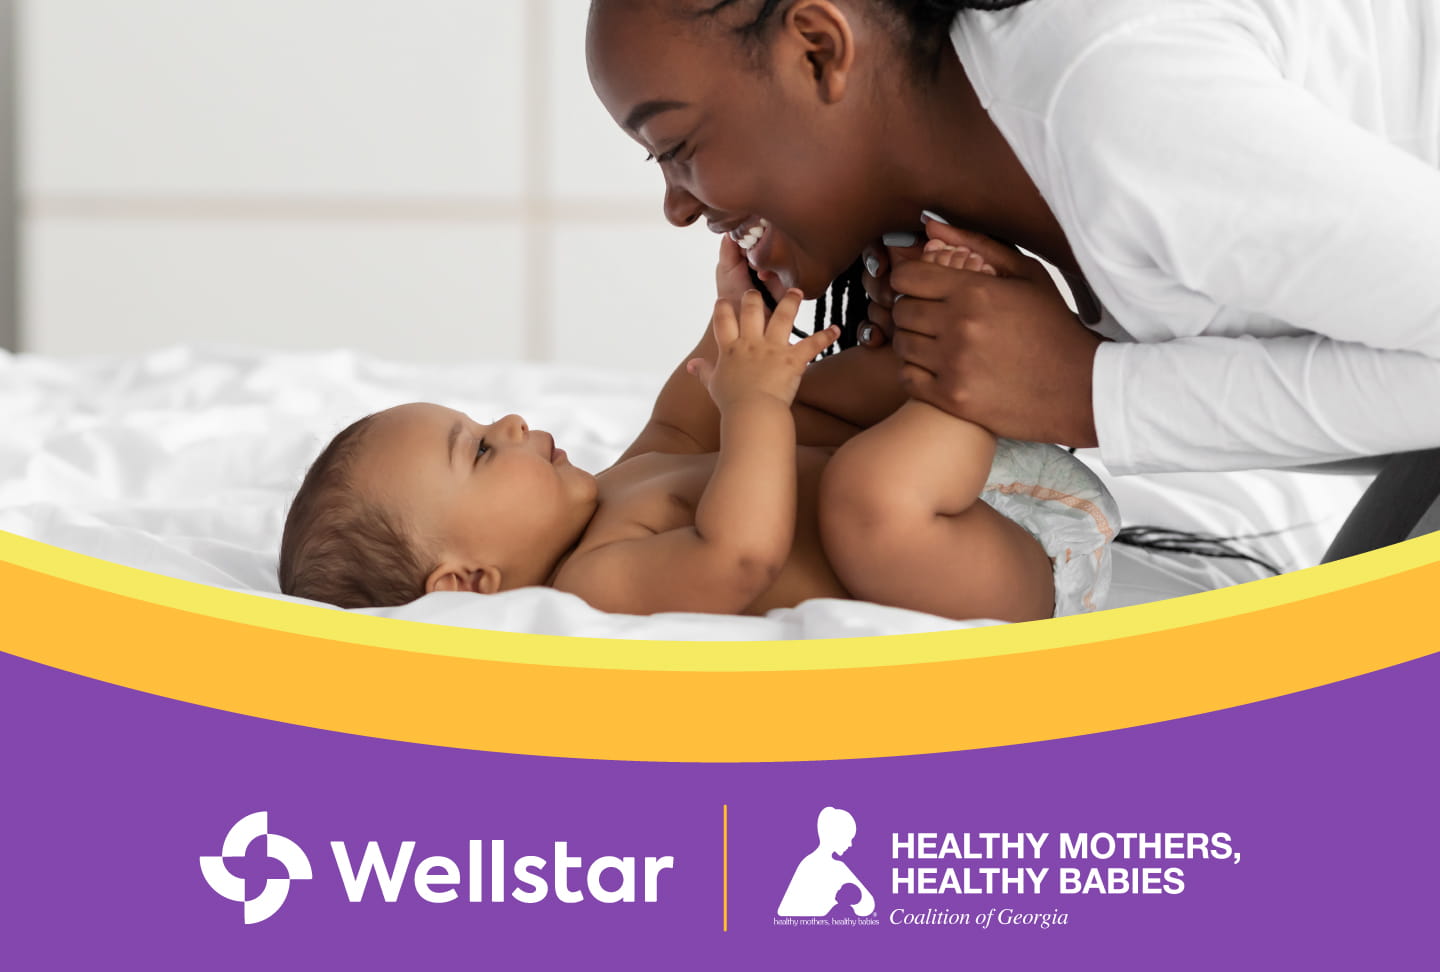 Wellstar Health System Partnership Provides Maternal Health Resources, Supports New Mothers Image